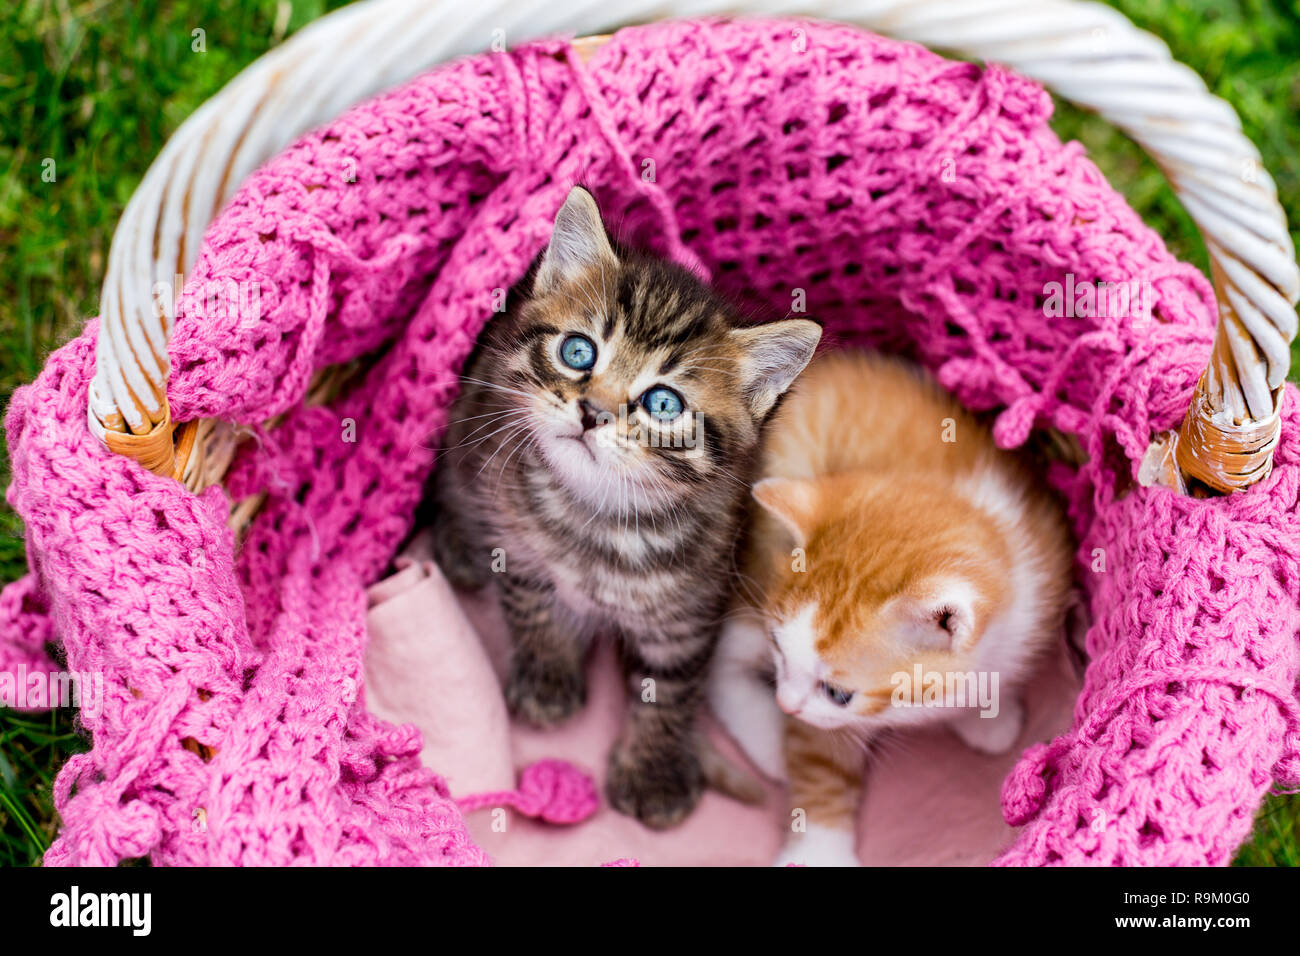 Cute baby striped kittens in basket with knitted pink scarf on green grass outdoors. Gray tabby kitten looks up Stock Photo